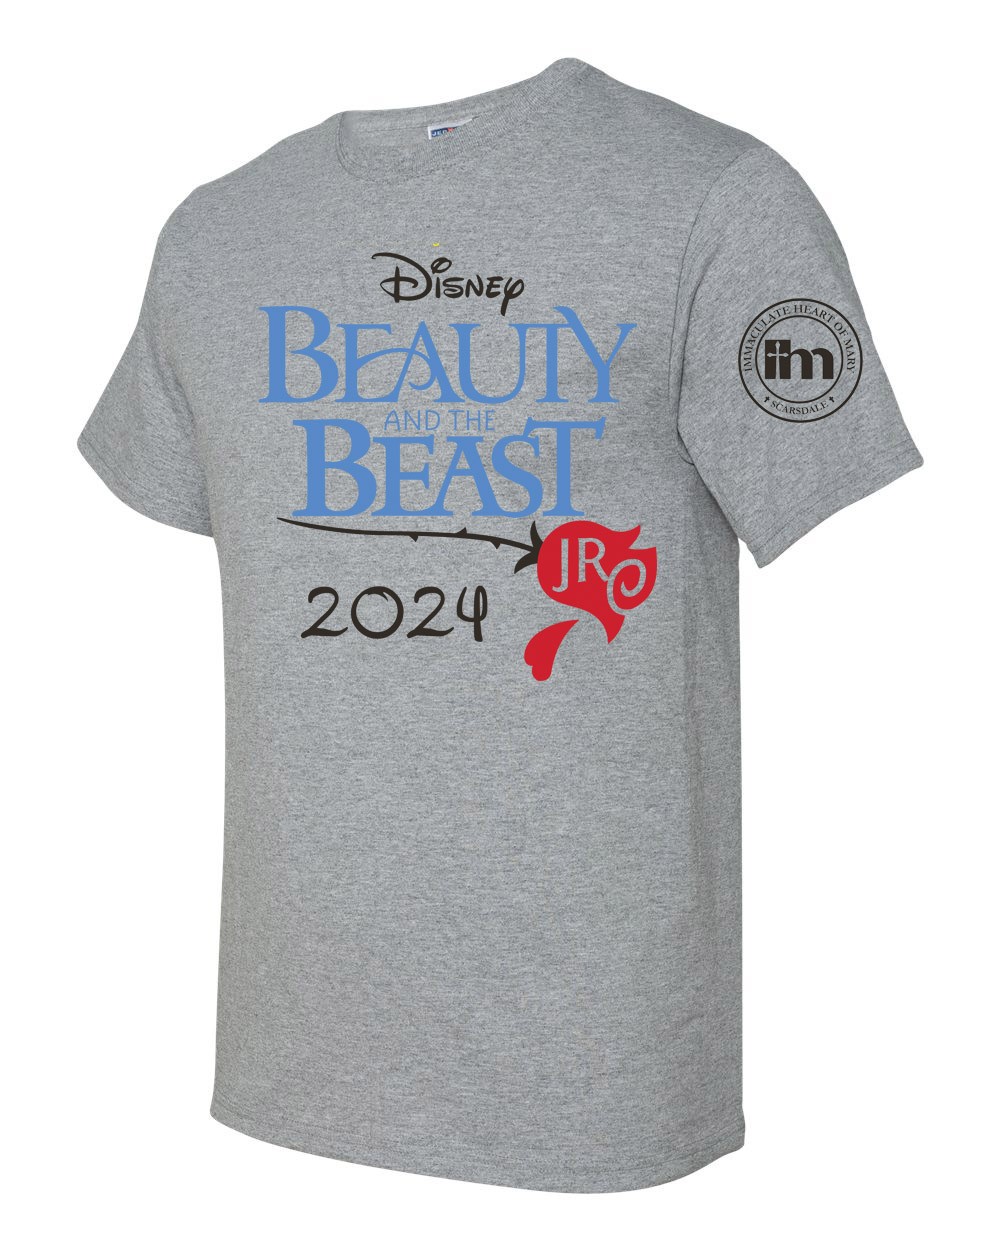 IHM Beauty and the Beast S/S T-shirt w/ Logo - Please Allow 2-3 Weeks for Delivery